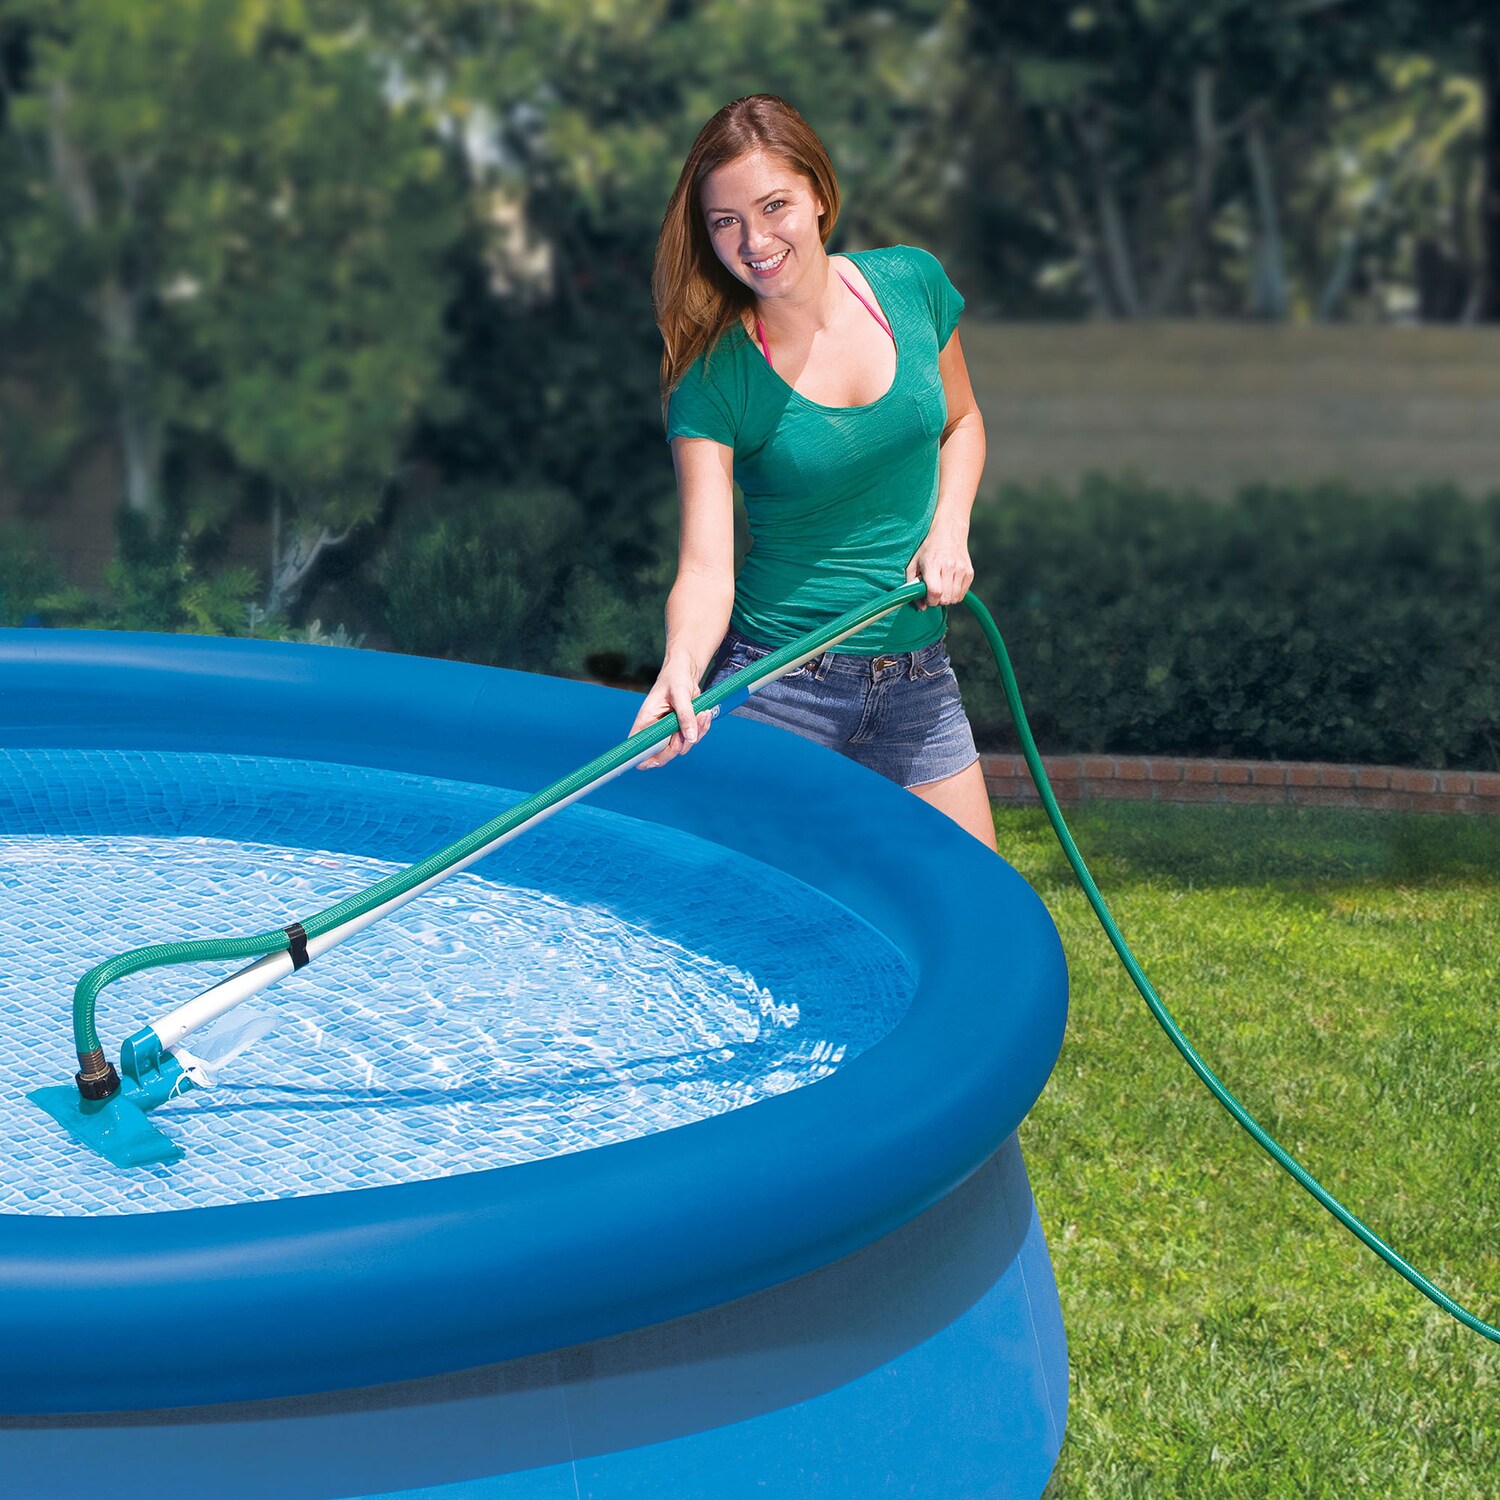 Intex 15 Ft X 15 Ft X 48 In Metal Frame Round Above Ground Pool With Filter Pump In The Above